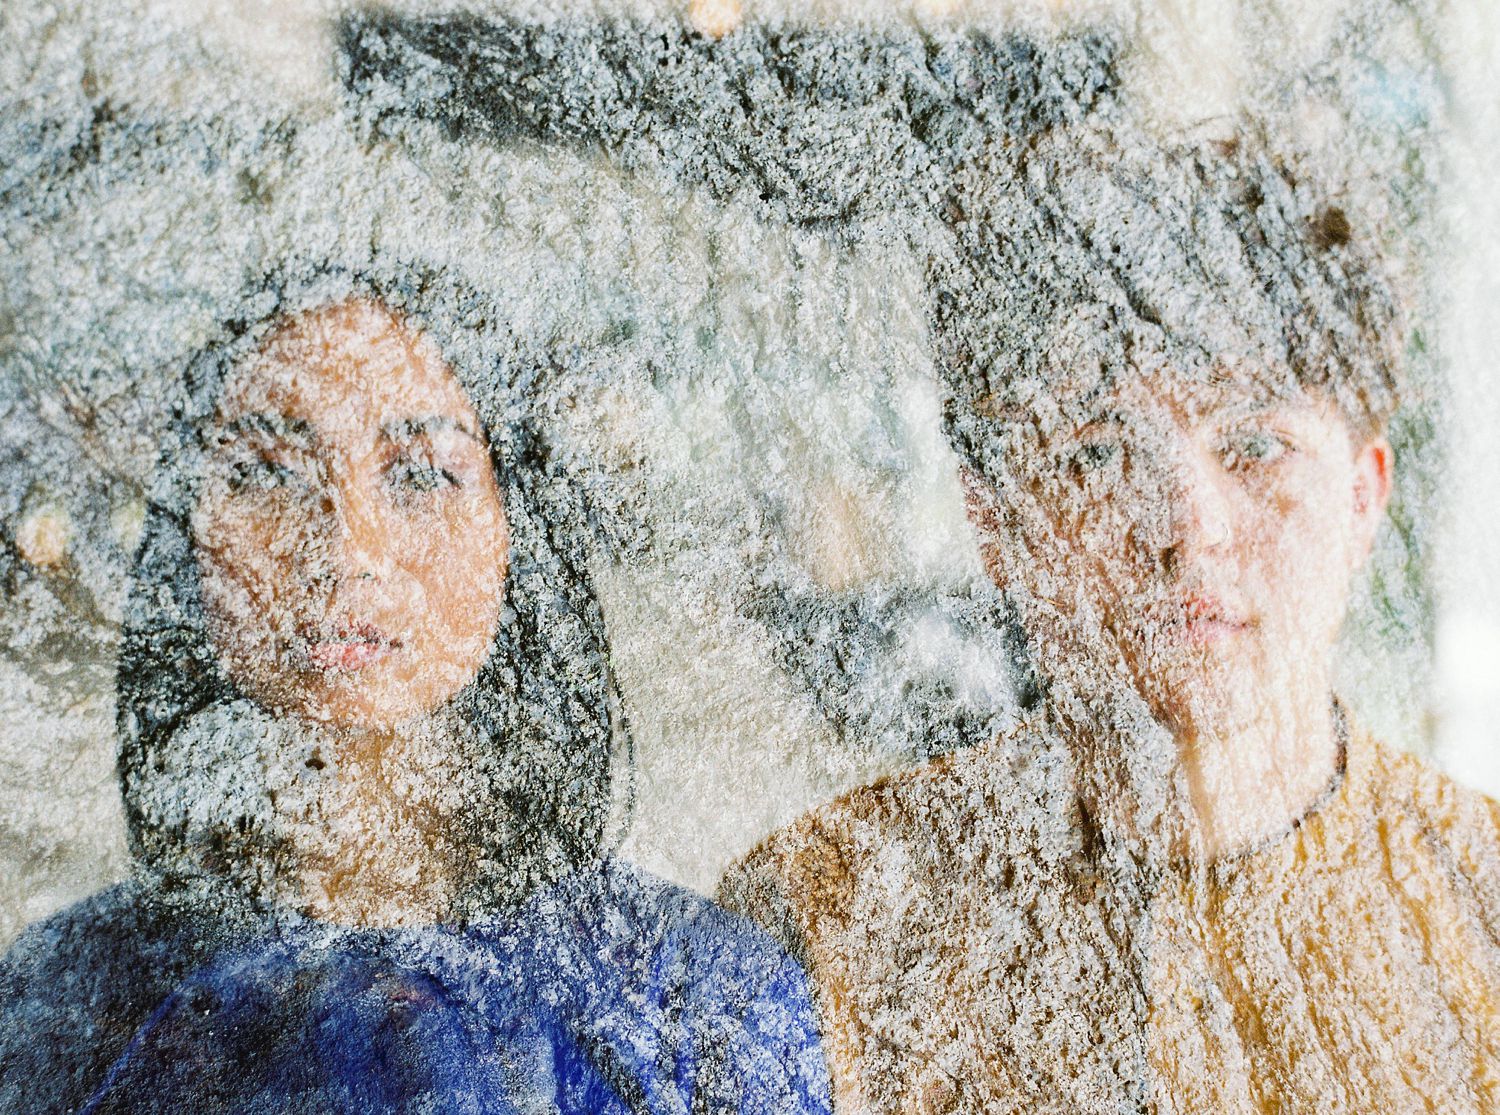 Double exposure engagement photos shot on film and Contax 645